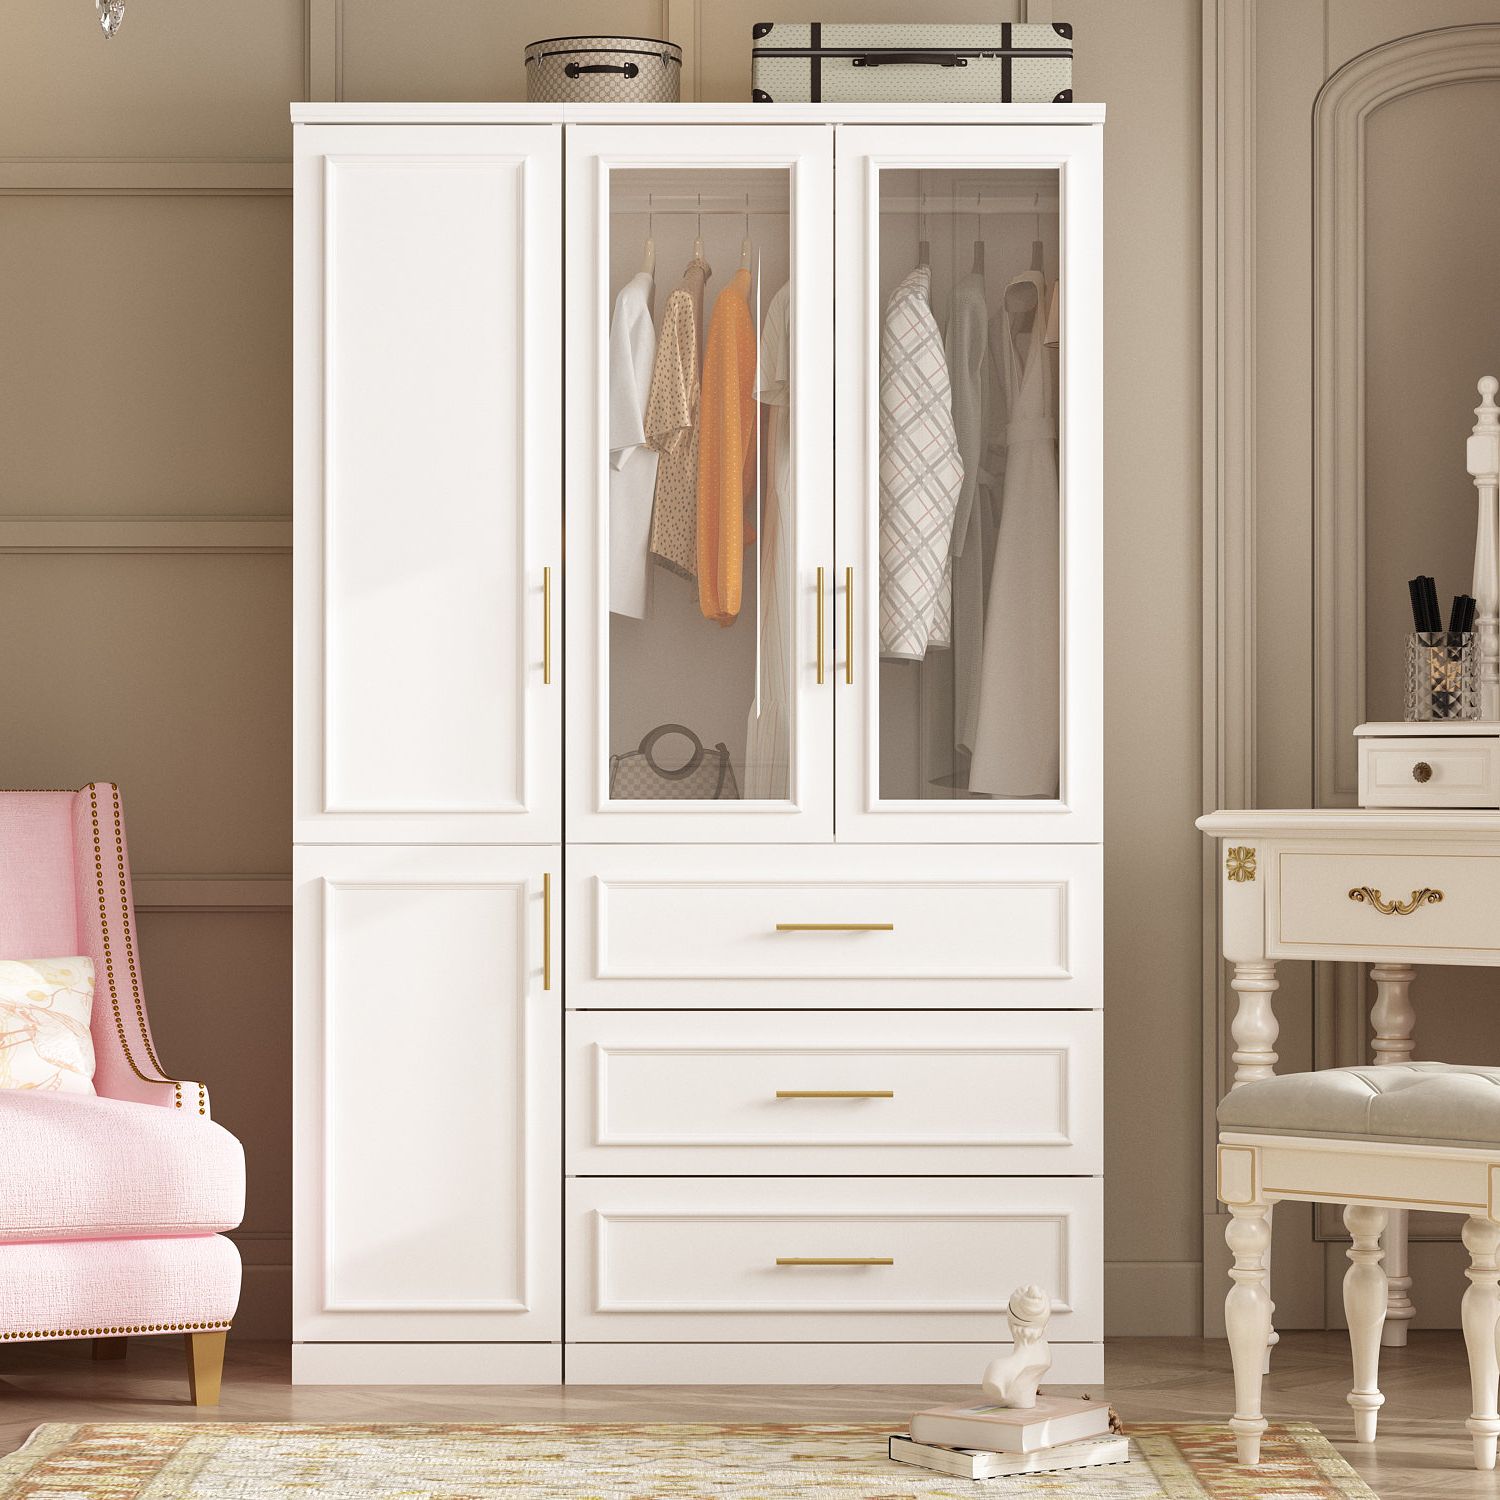 Latitude Run® Armoire | Wayfair Intended For White Wardrobes With Drawers (View 7 of 20)